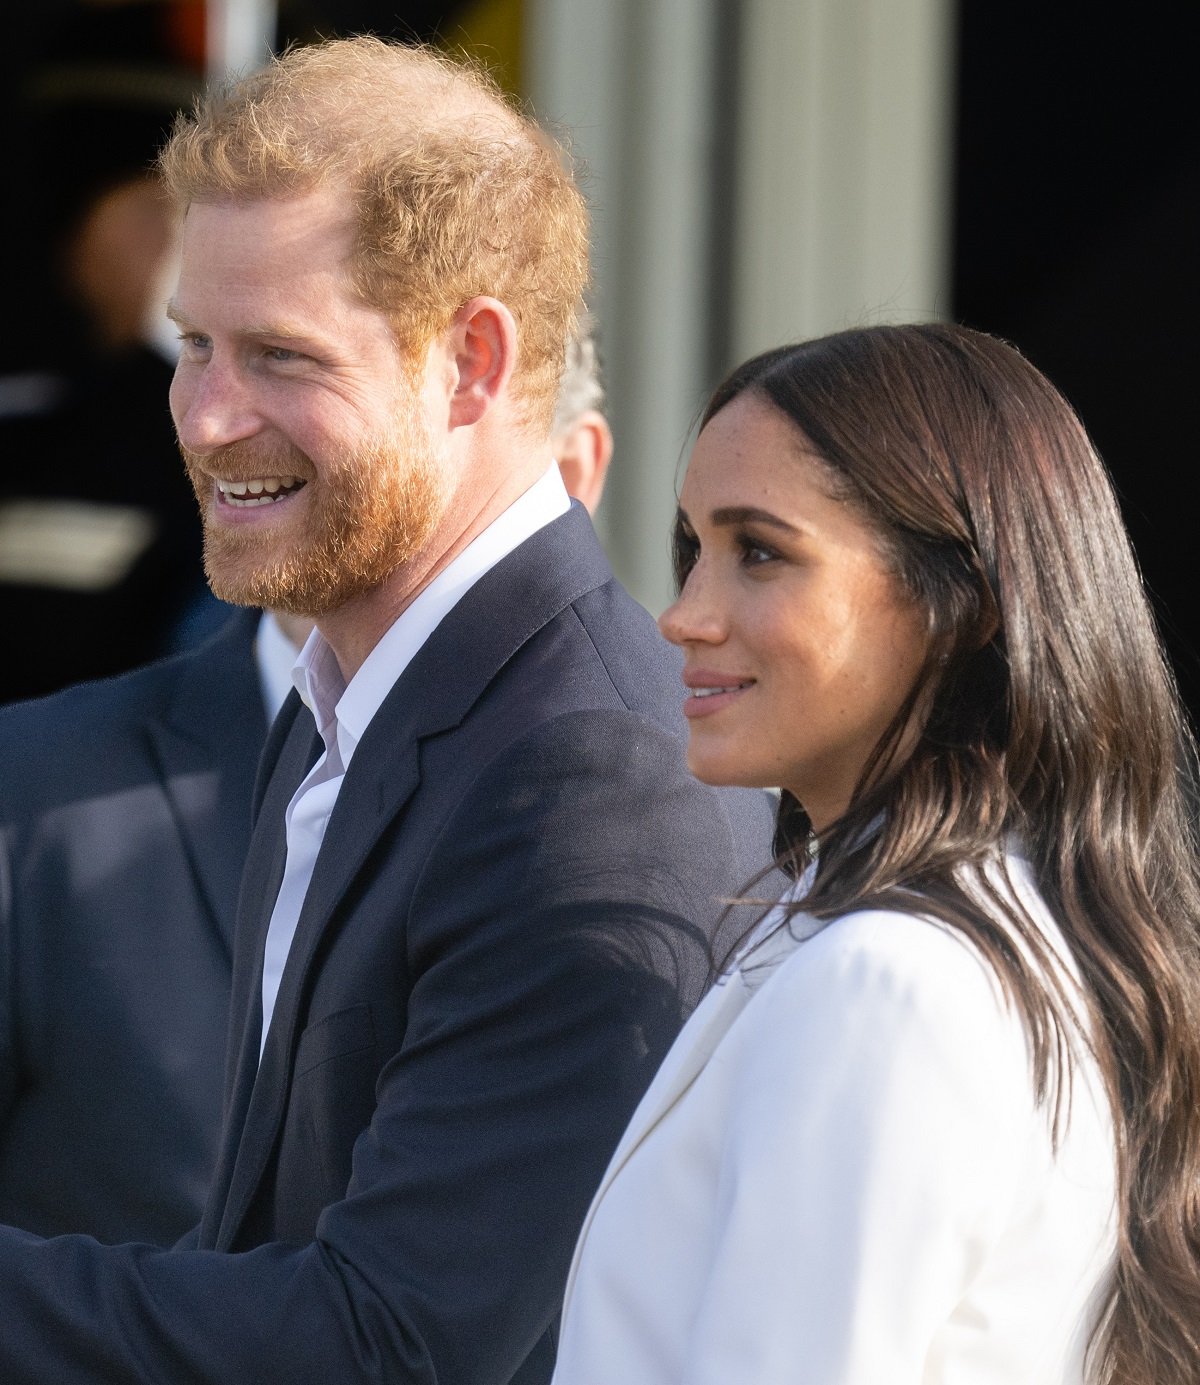 Prince Harry and Meghan Markle attend a reception for friends and family of competitors of the Invictus Games